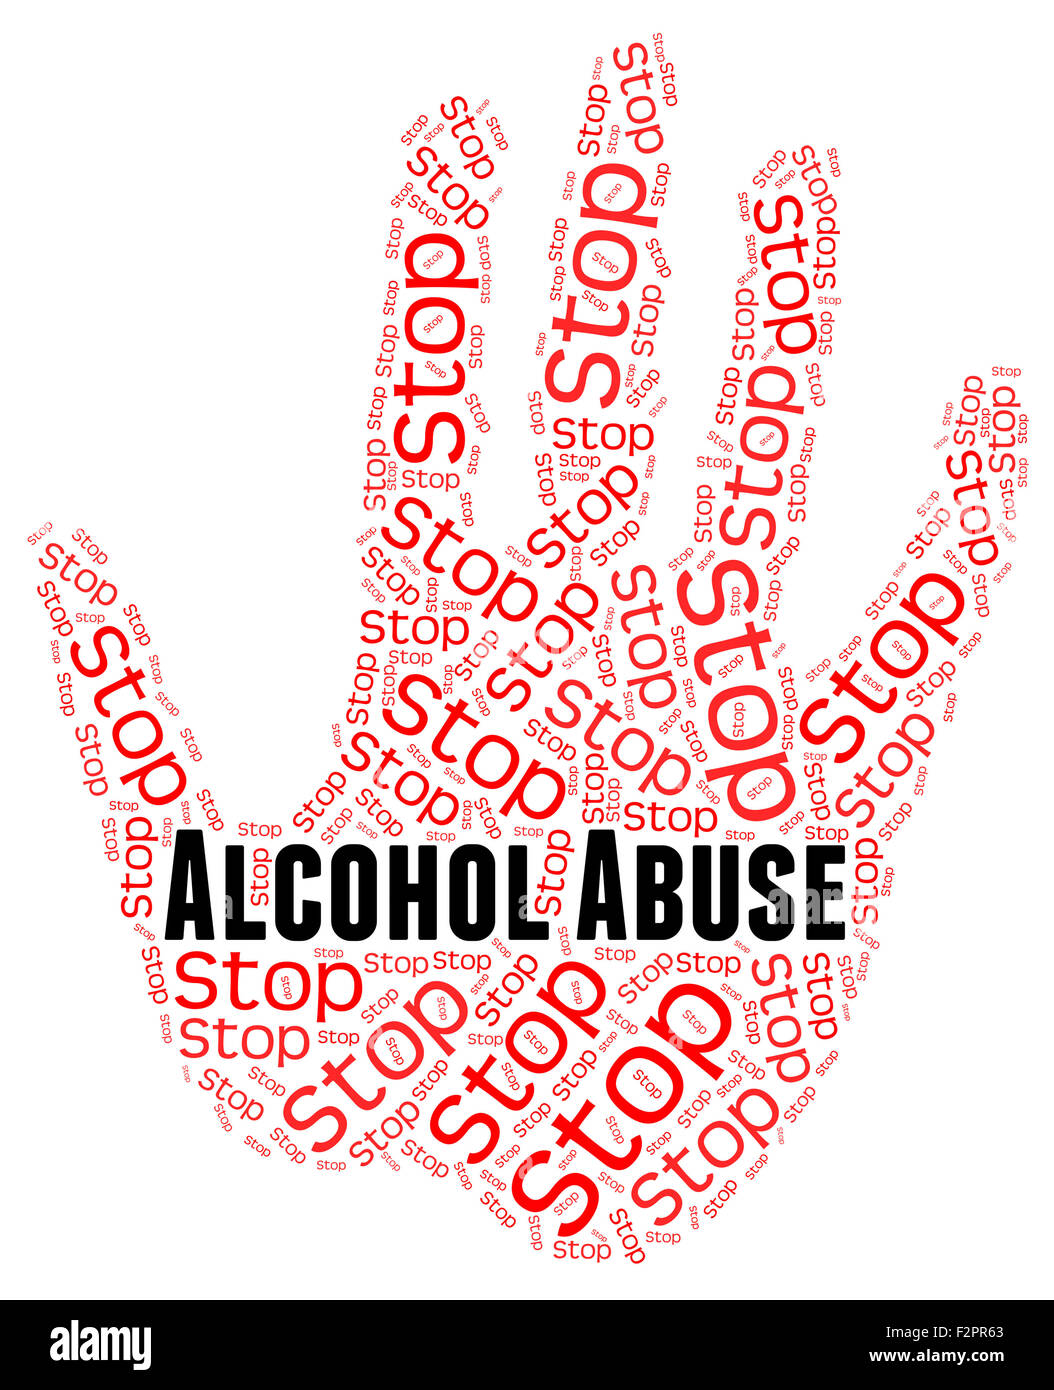 Stop Alcohol Abuse Indicating Treat Badly And Cruelty Stock Photo